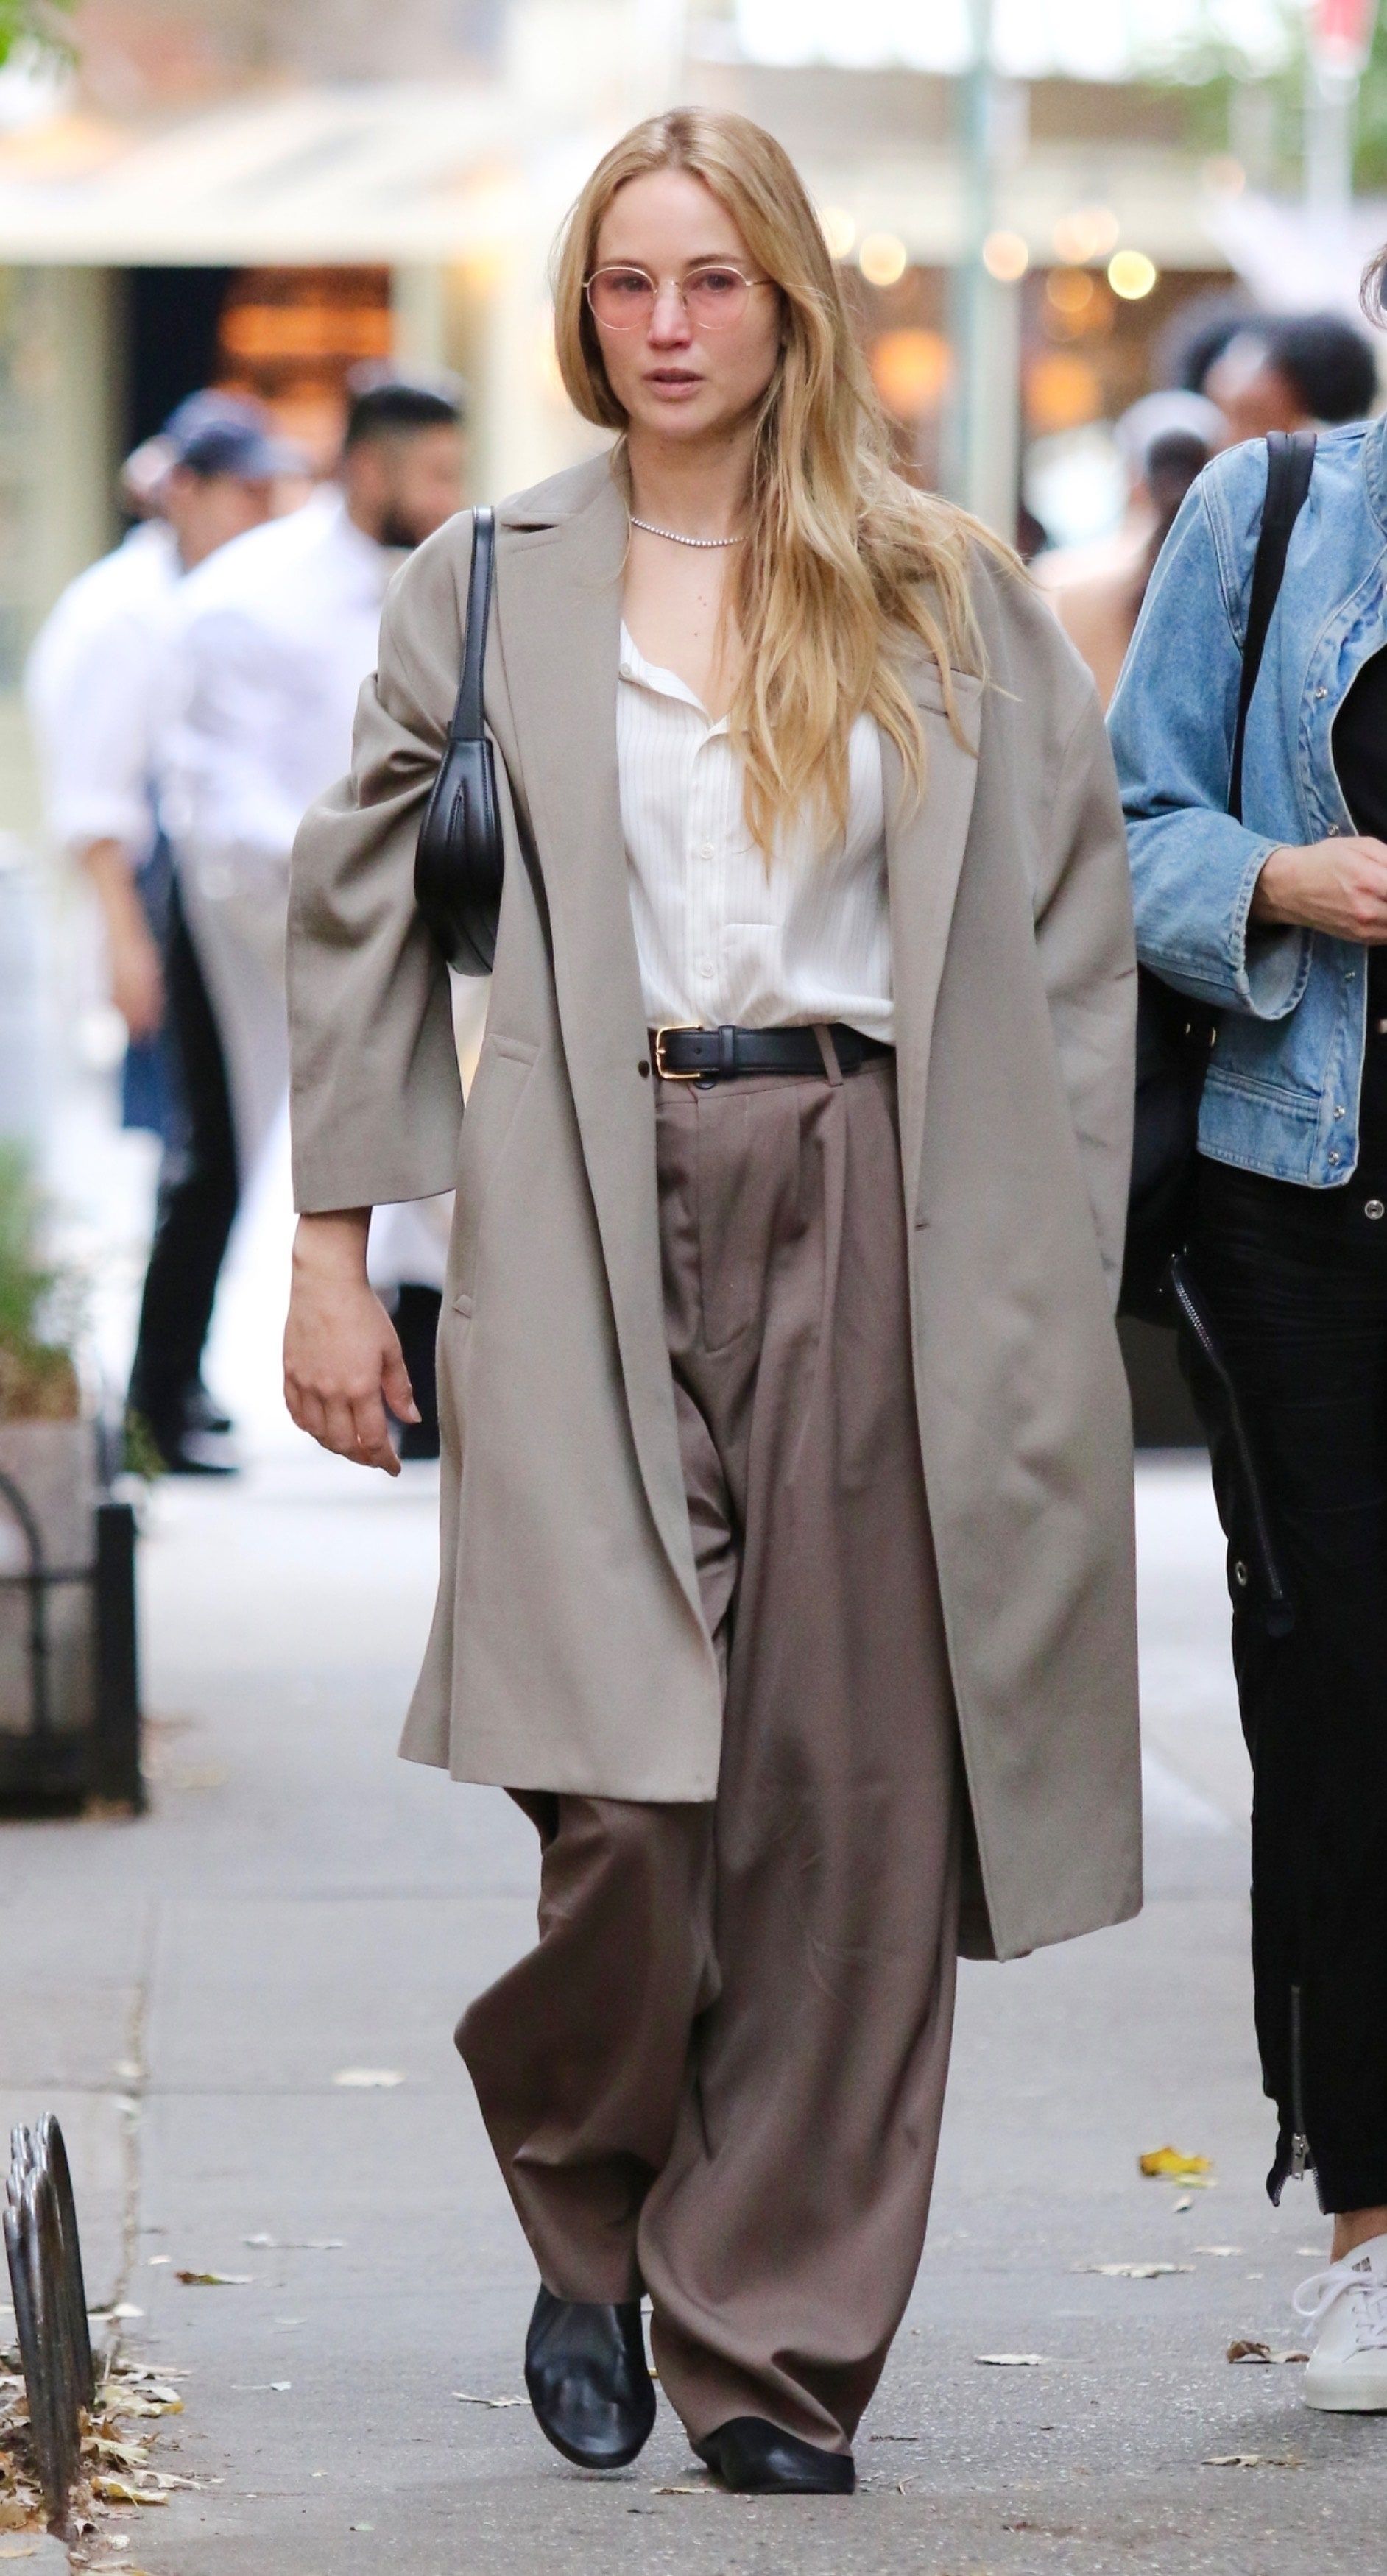 The 24-year-old model wore a pair of wide-leg trousers with a white shirt and a beige coat. - Jennifer Lawrence